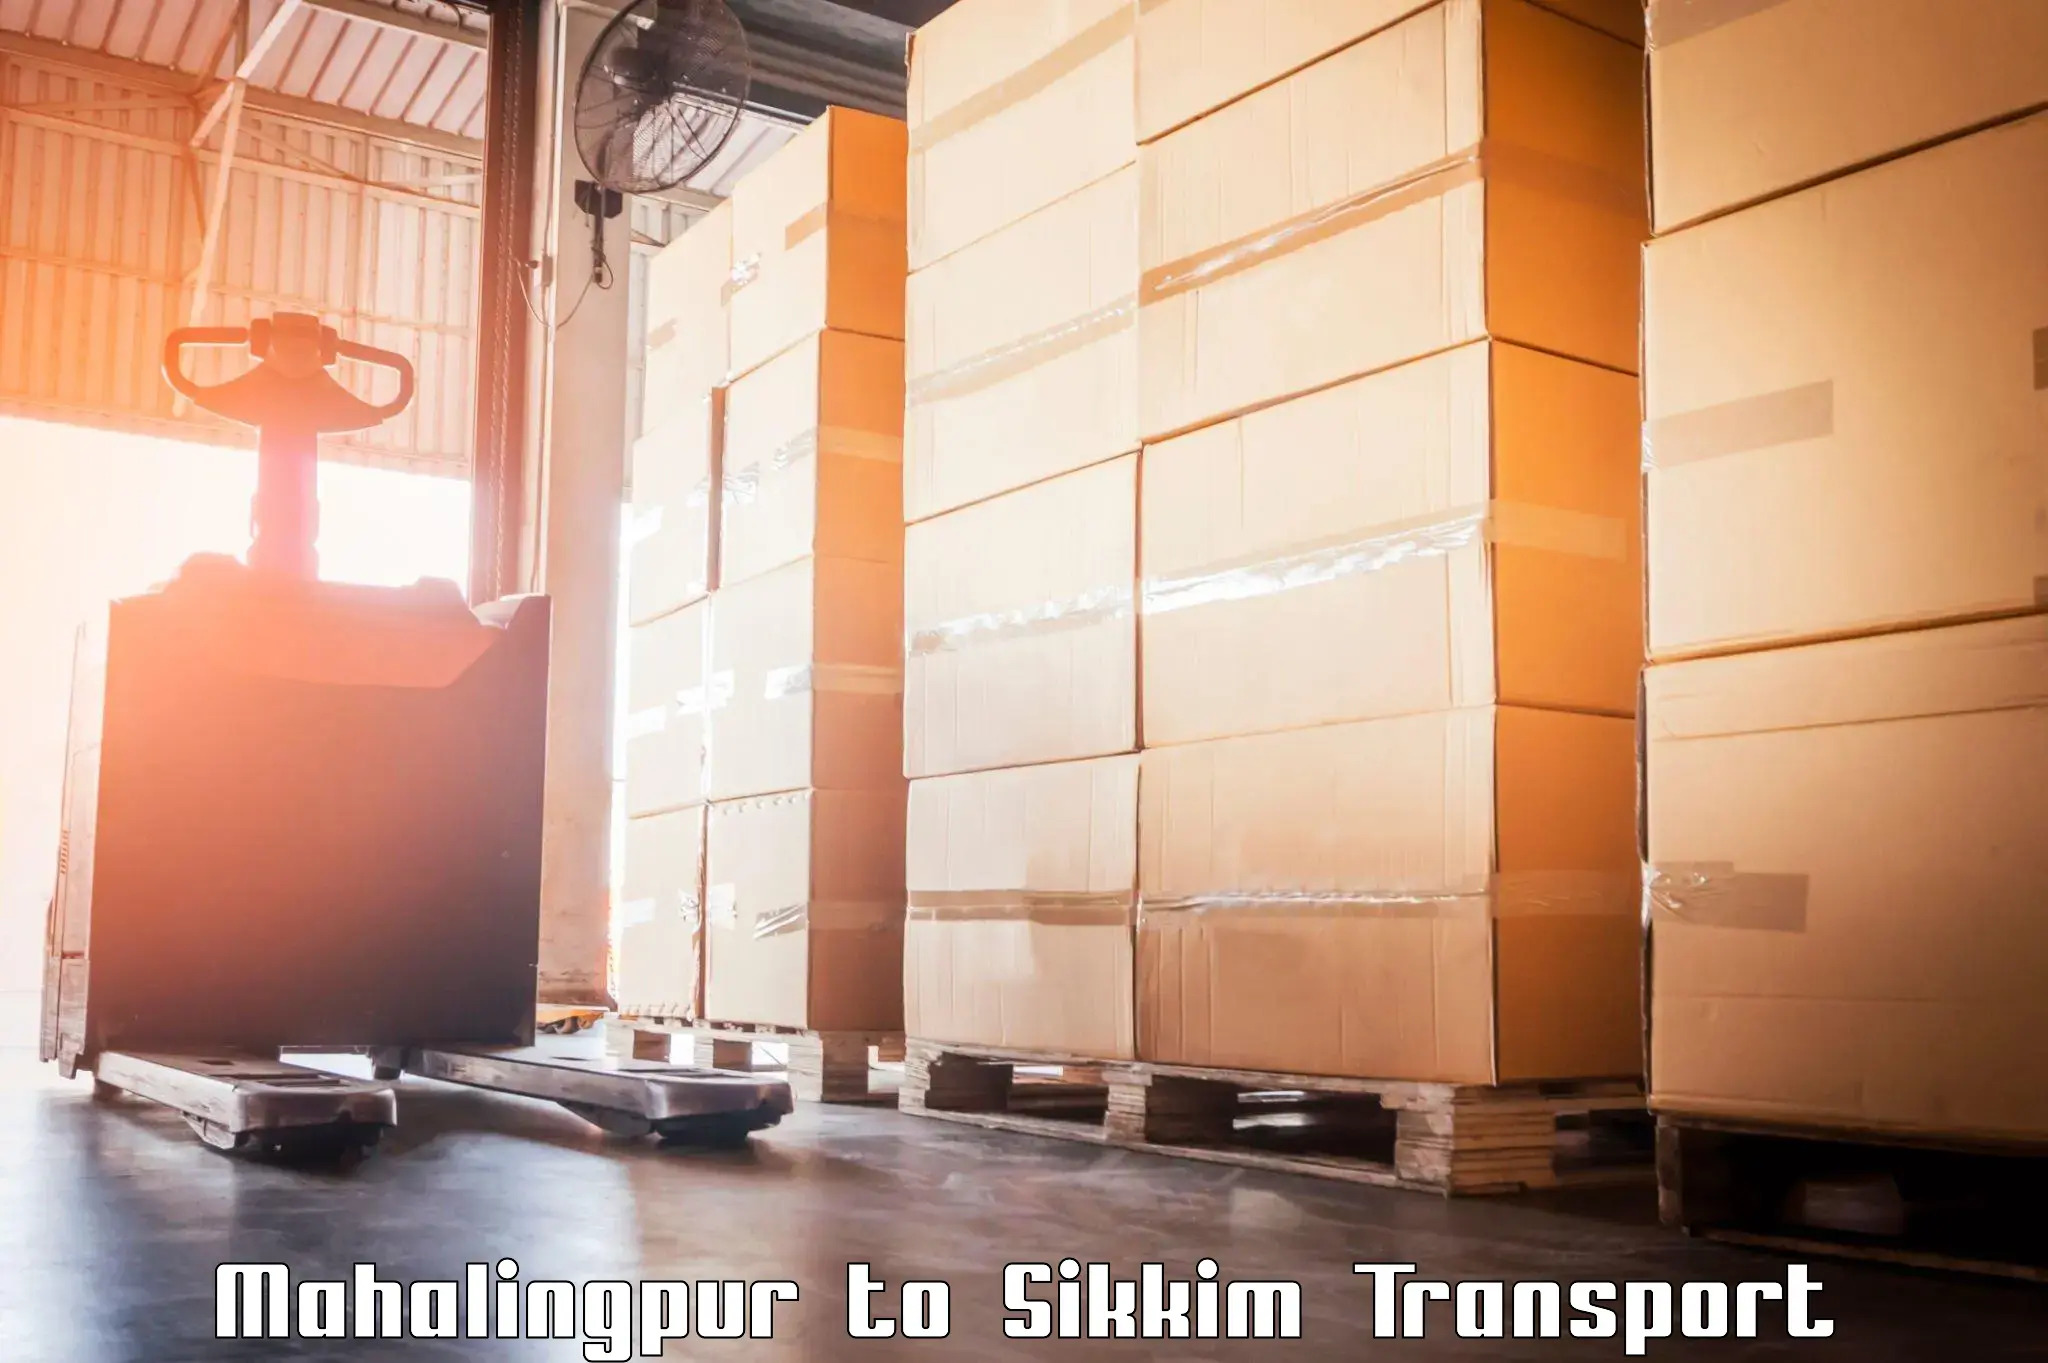 Nearby transport service Mahalingpur to Sikkim